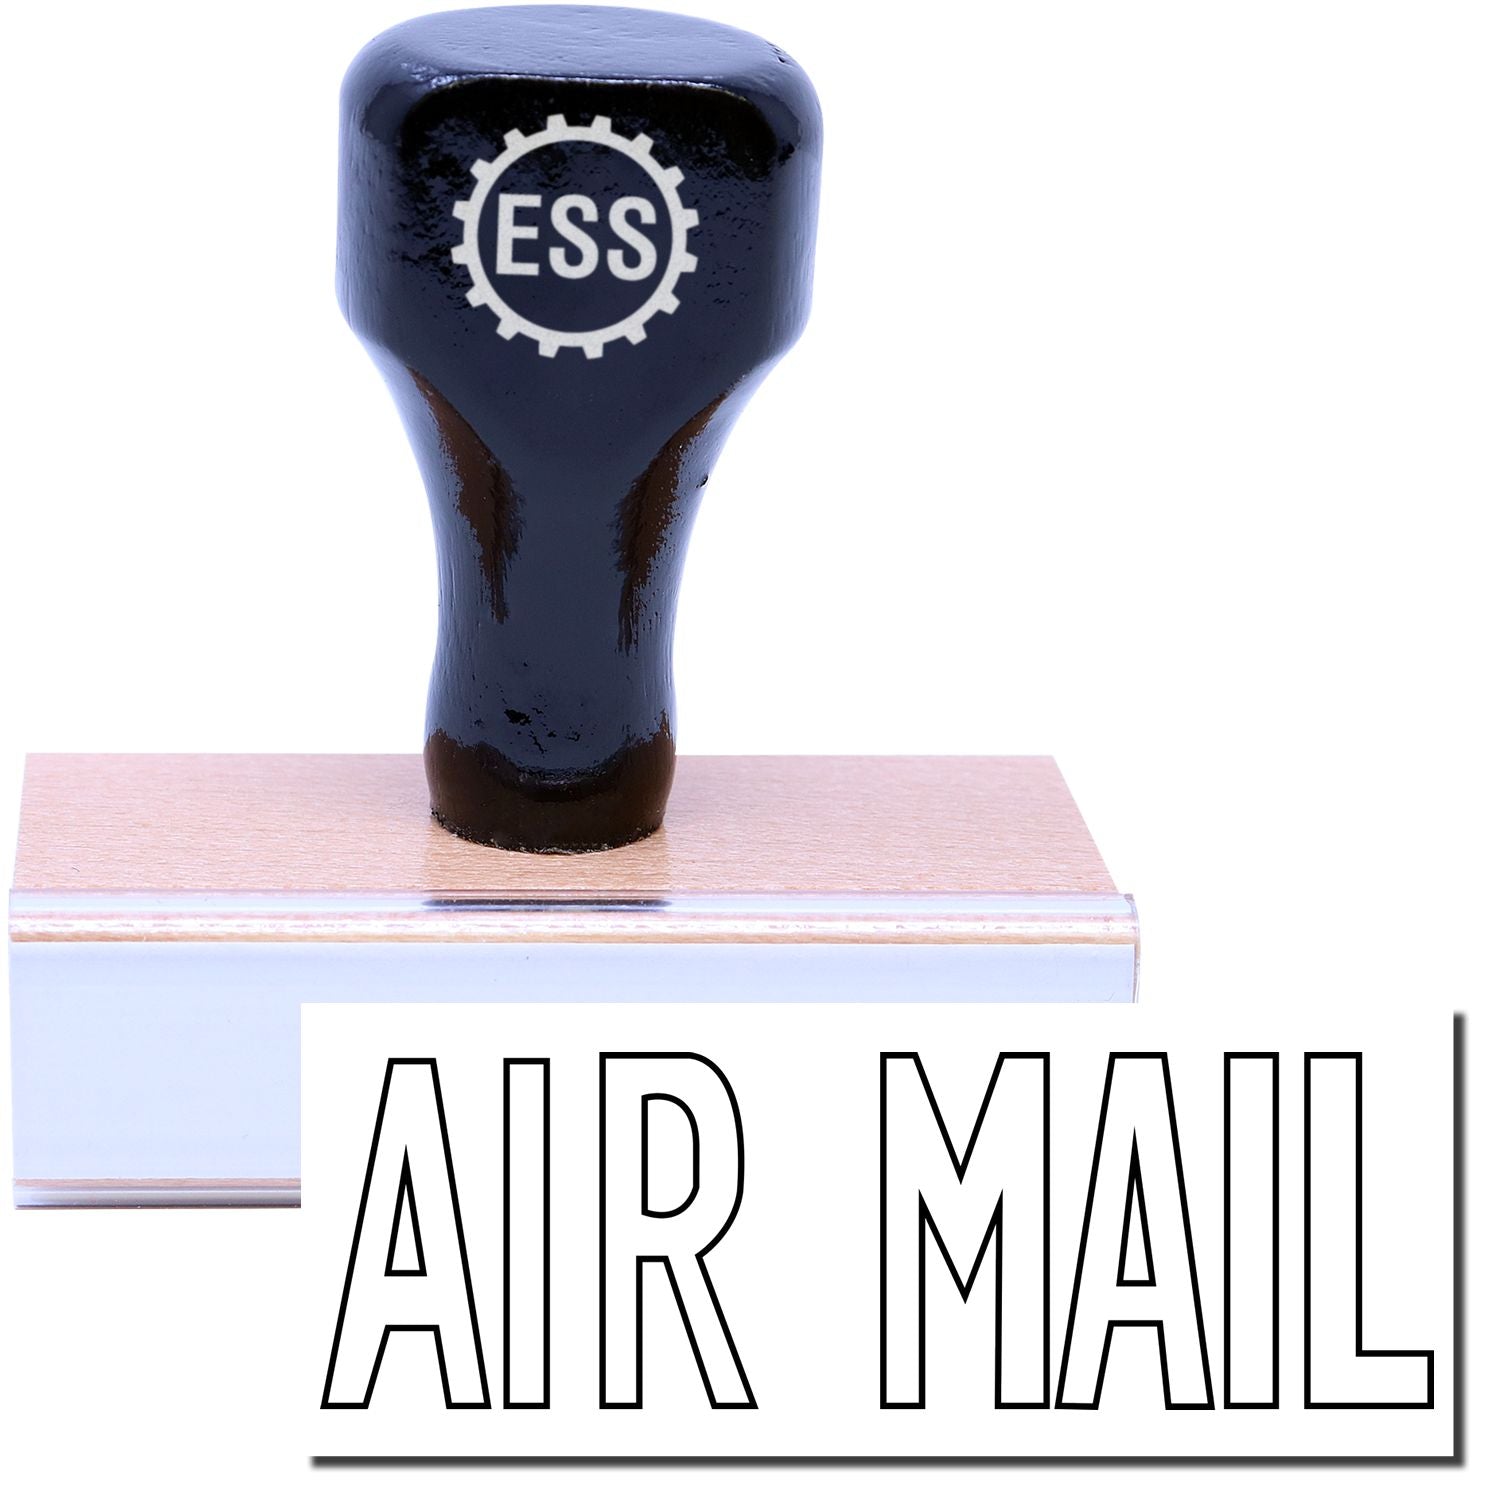 A stock office rubber stamp with a stamped image showing how the text "AIR MAIL" in a large outline font is displayed after stamping.